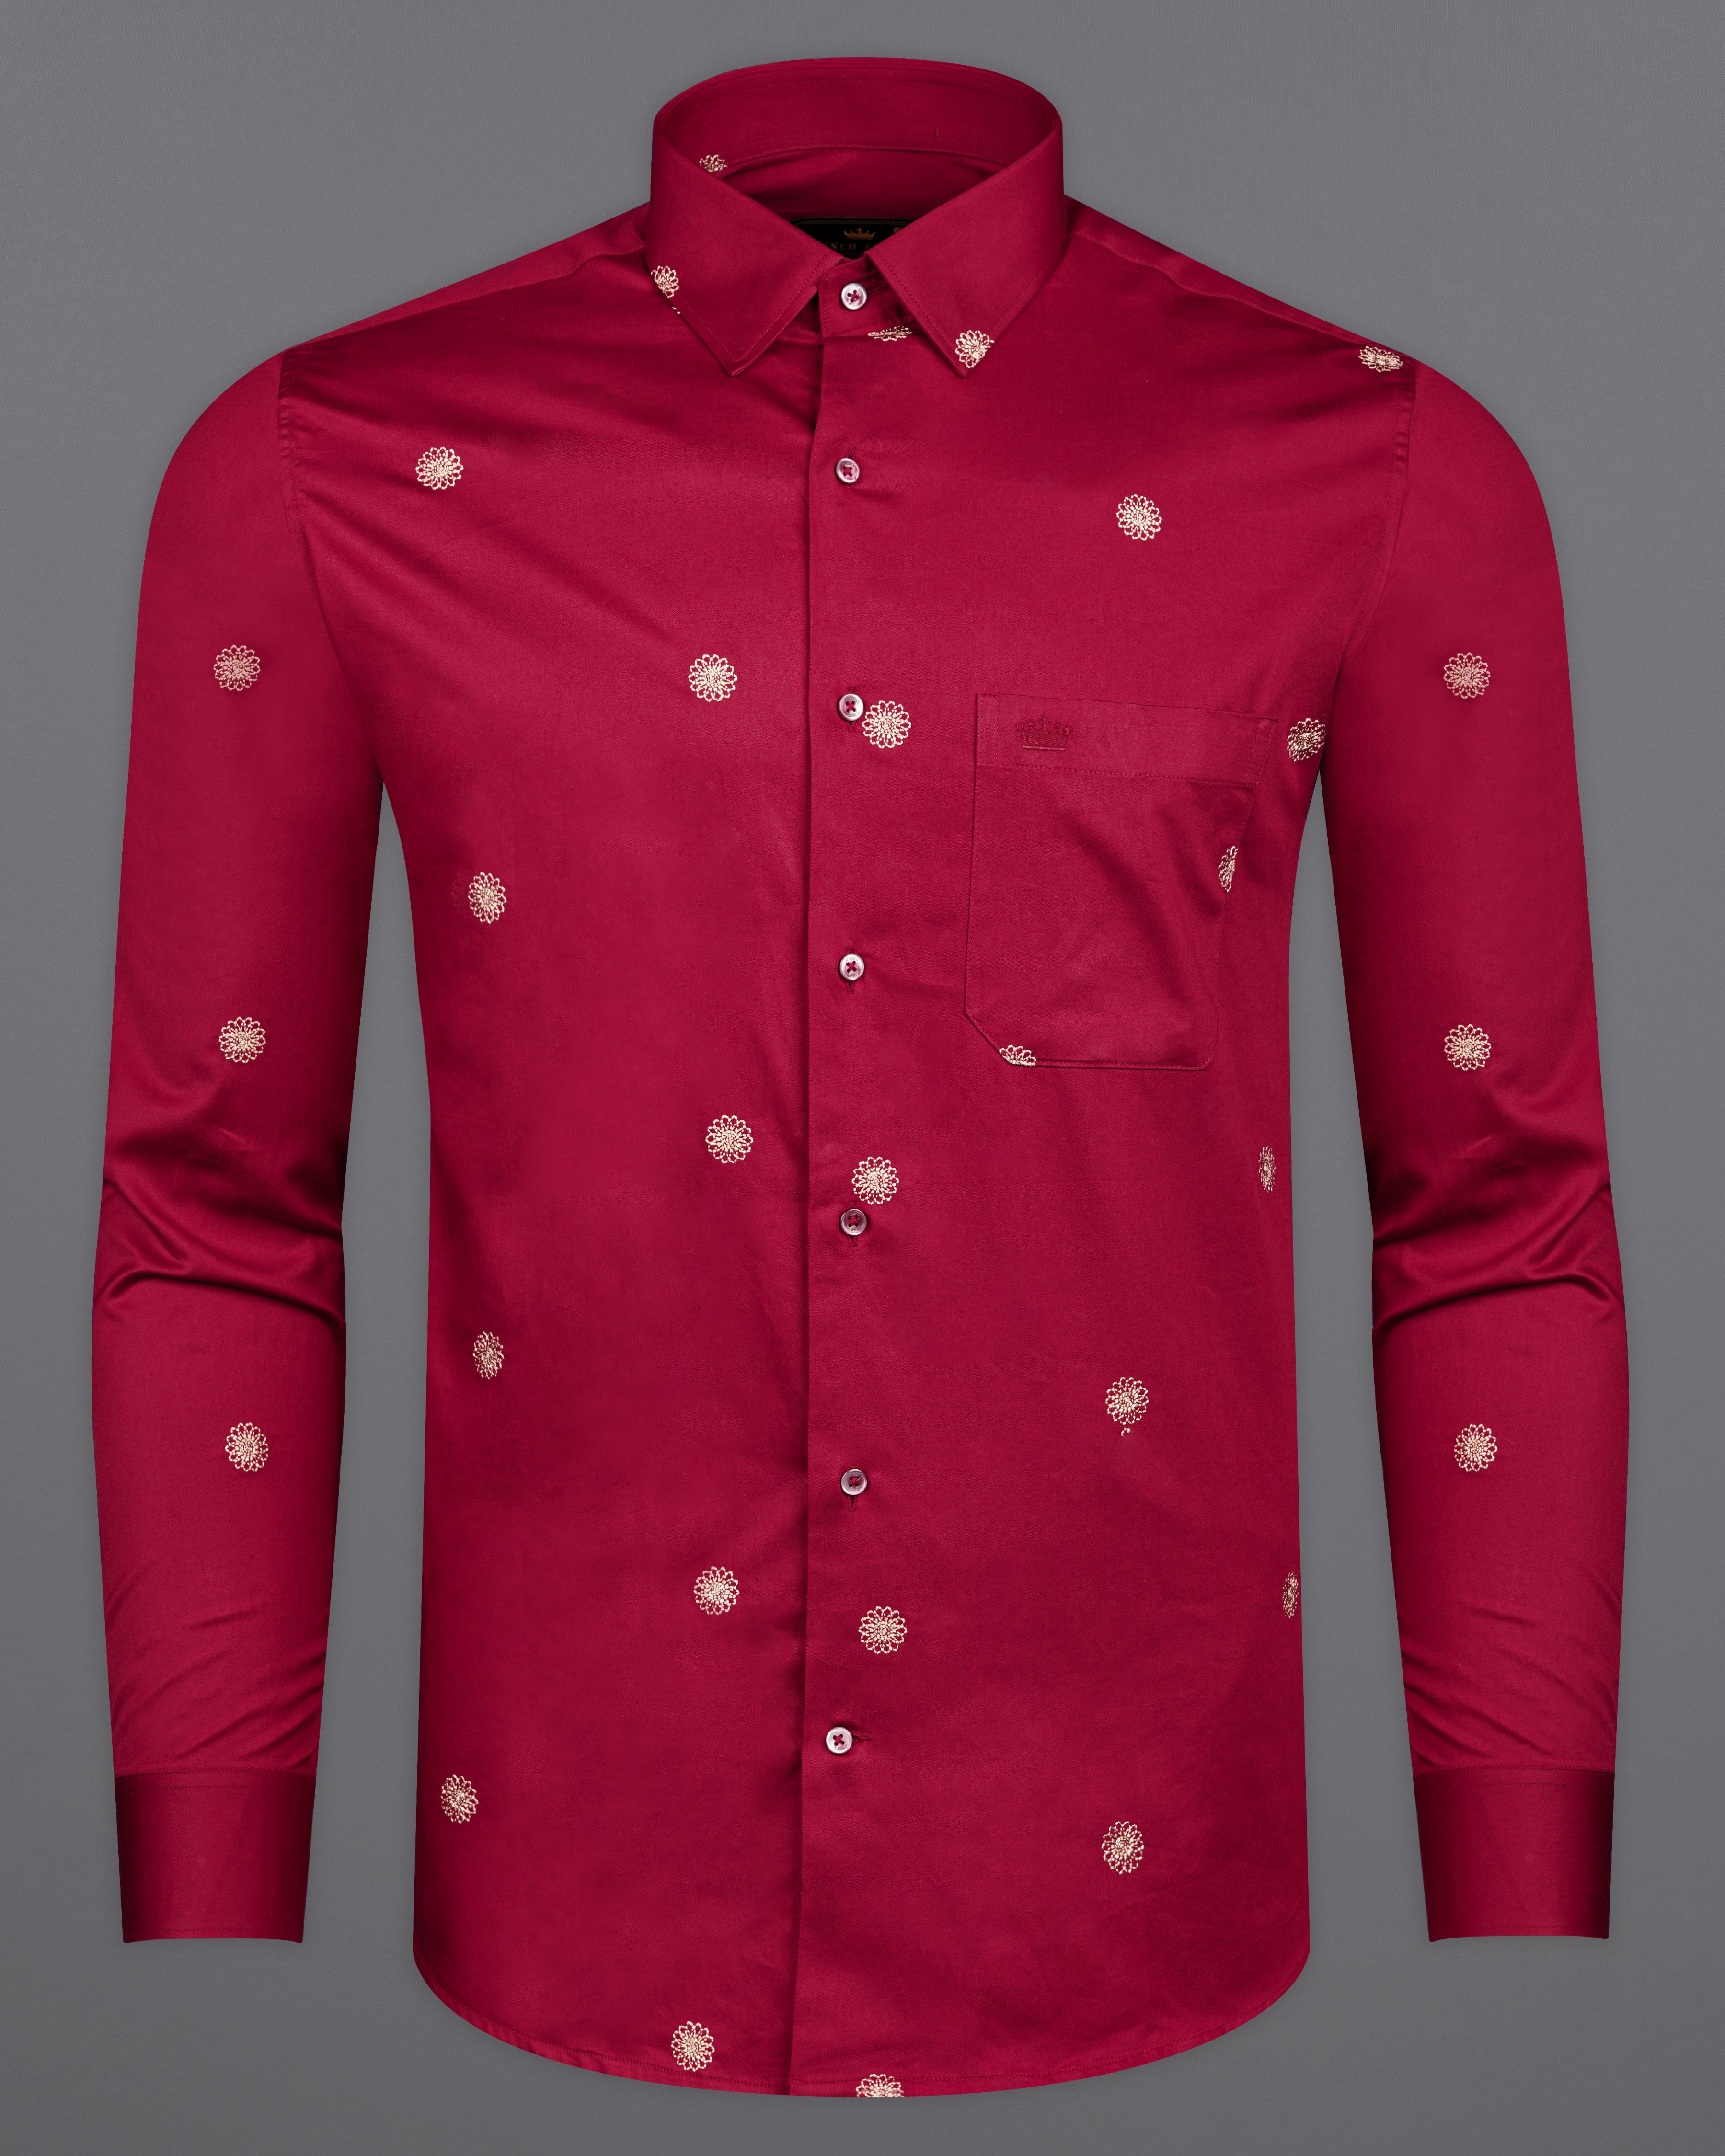 Mulberry Red with Negroni Cream Embroidered Super Soft Premium Cotton Shirt 9863-MN-38, 9863-MN-H-38, 9863-MN-39, 9863-MN-H-39, 9863-MN-40, 9863-MN-H-40, 9863-MN-42, 9863-MN-H-42, 9863-MN-44, 9863-MN-H-44, 9863-MN-46, 9863-MN-H-46, 9863-MN-48, 9863-MN-H-48, 9863-MN-50, 9863-MN-H-50, 9863-MN-52, 9863-MN-H-52